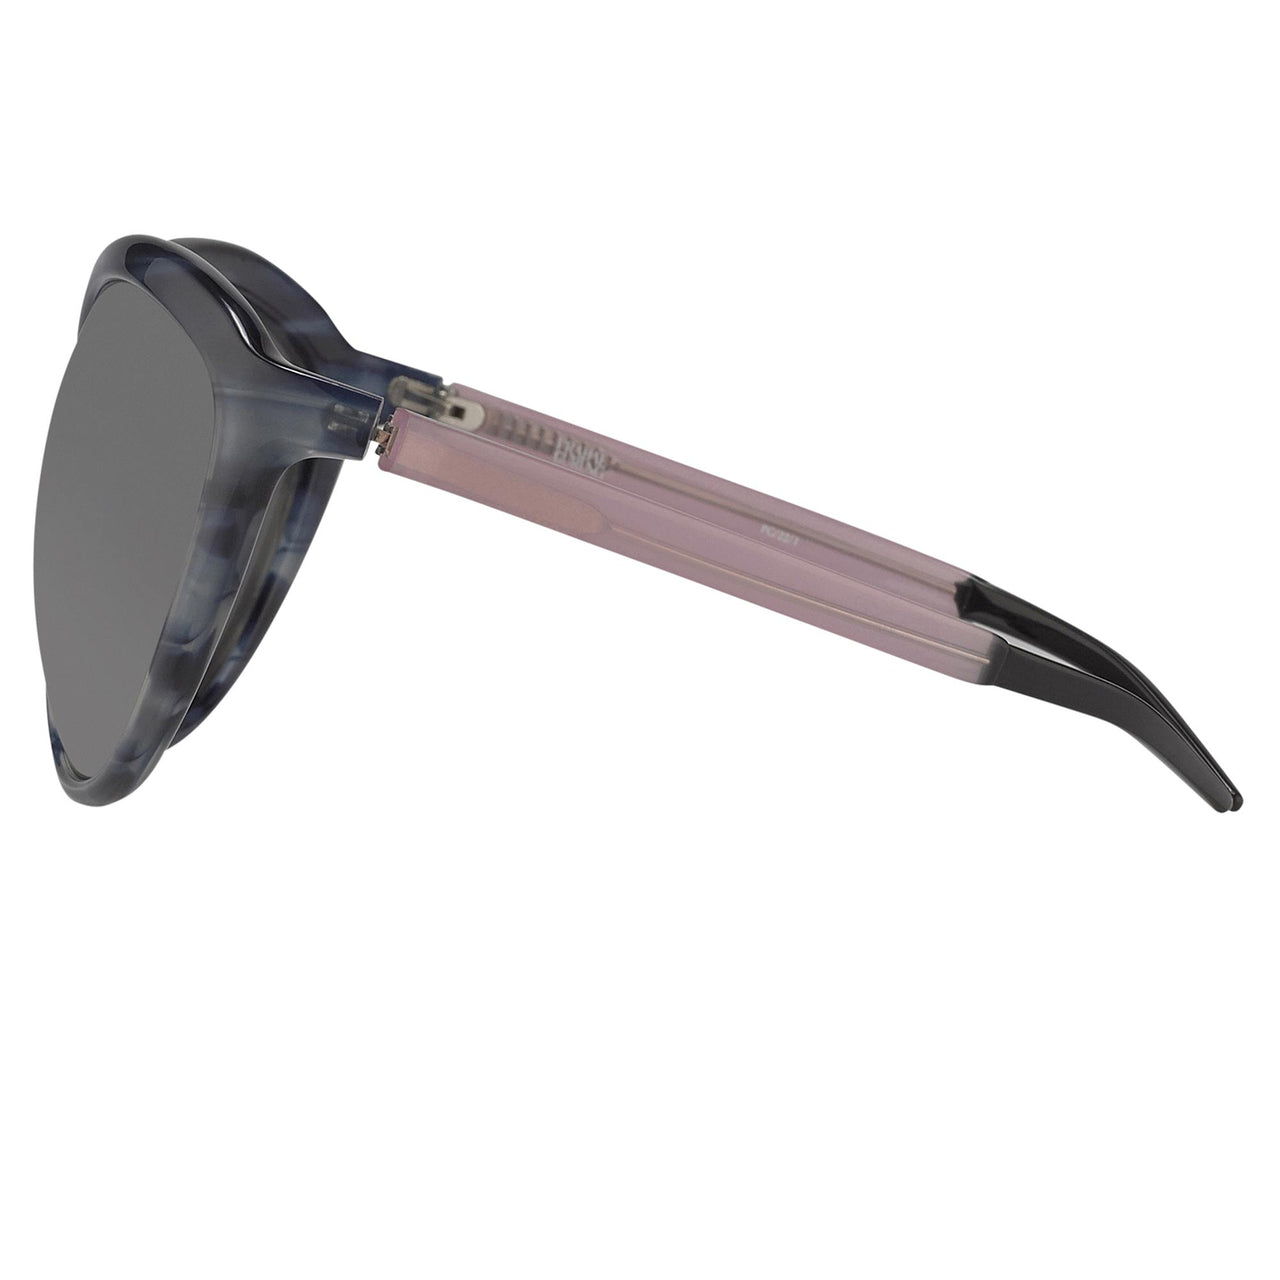 Prabal Gurung Sunglasses Female Oversized Blue Horn and Clear Pink/Black Category 3 Grey Mirror Lenses PG22C1SUN - Watches & Crystals